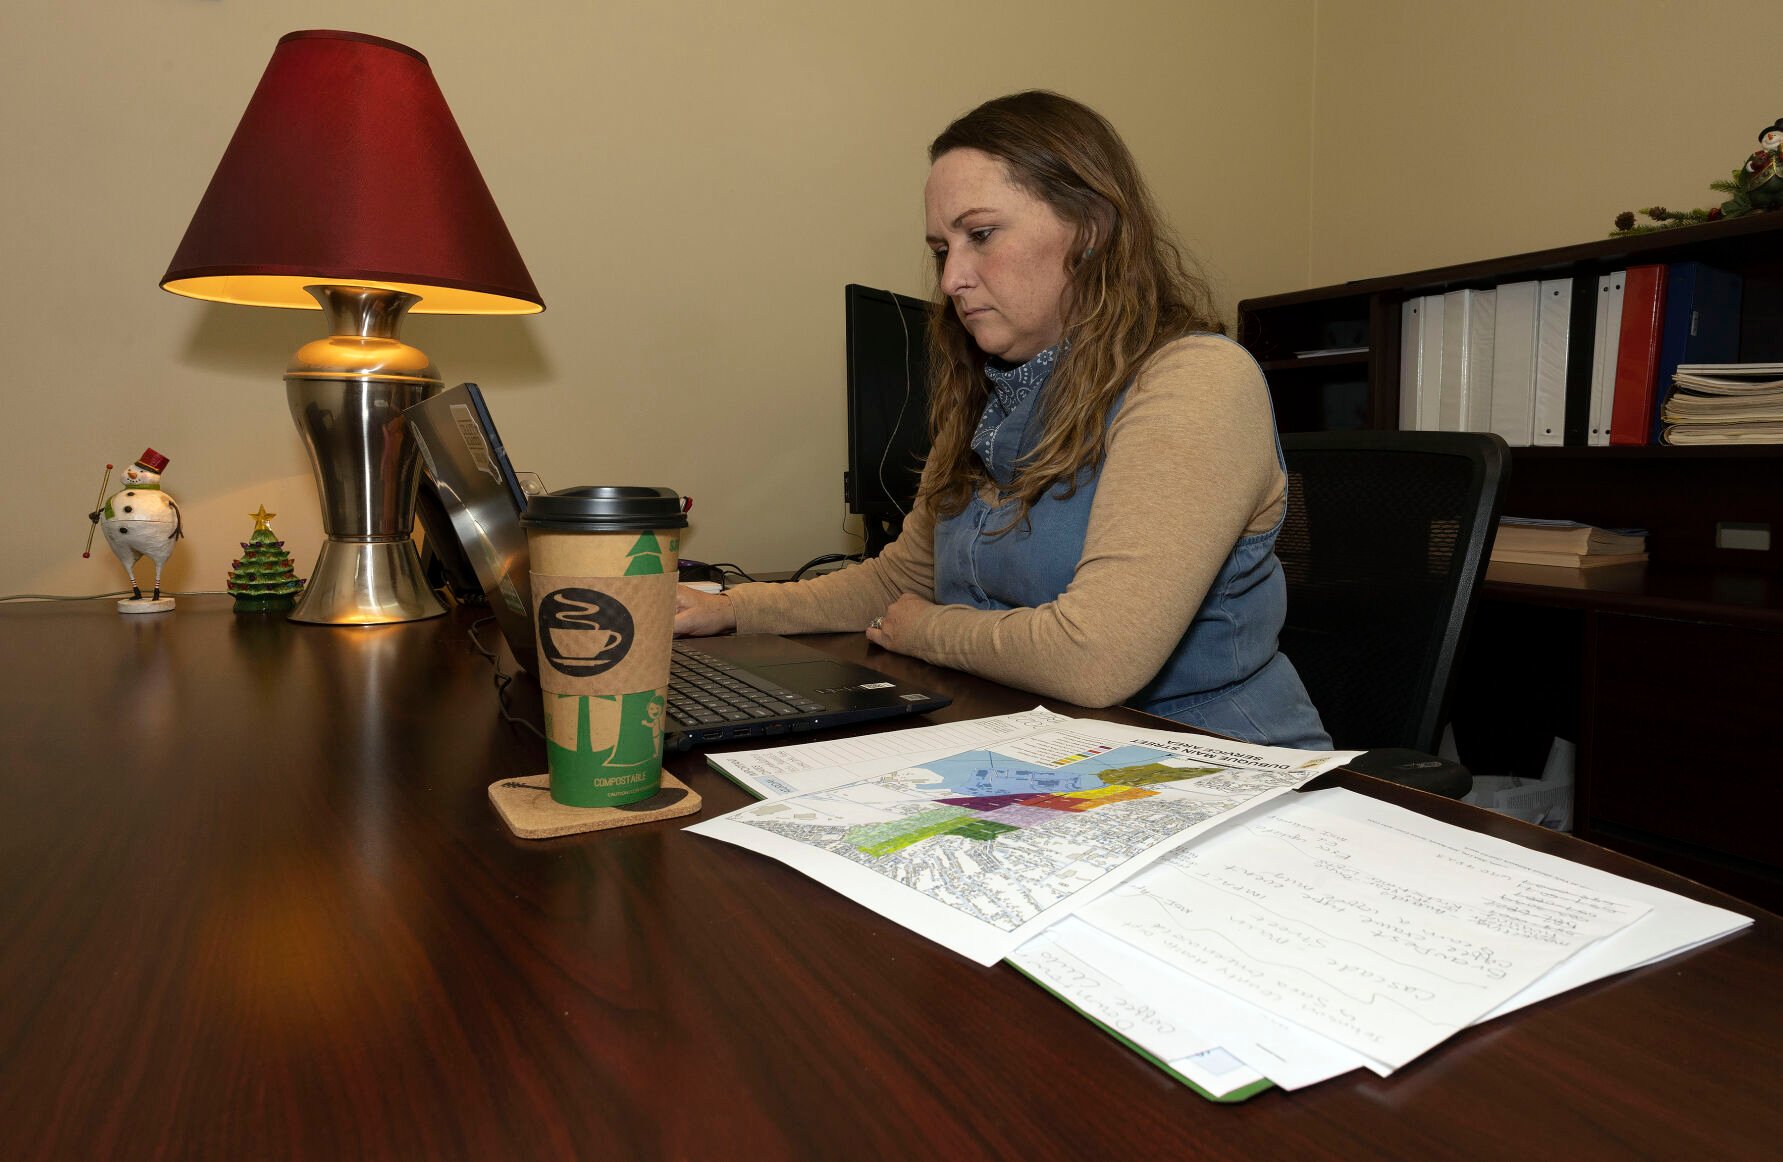 Main Street Dubuque Director Danielle Jacobs at her office.    PHOTO CREDIT: Stephen Gassman